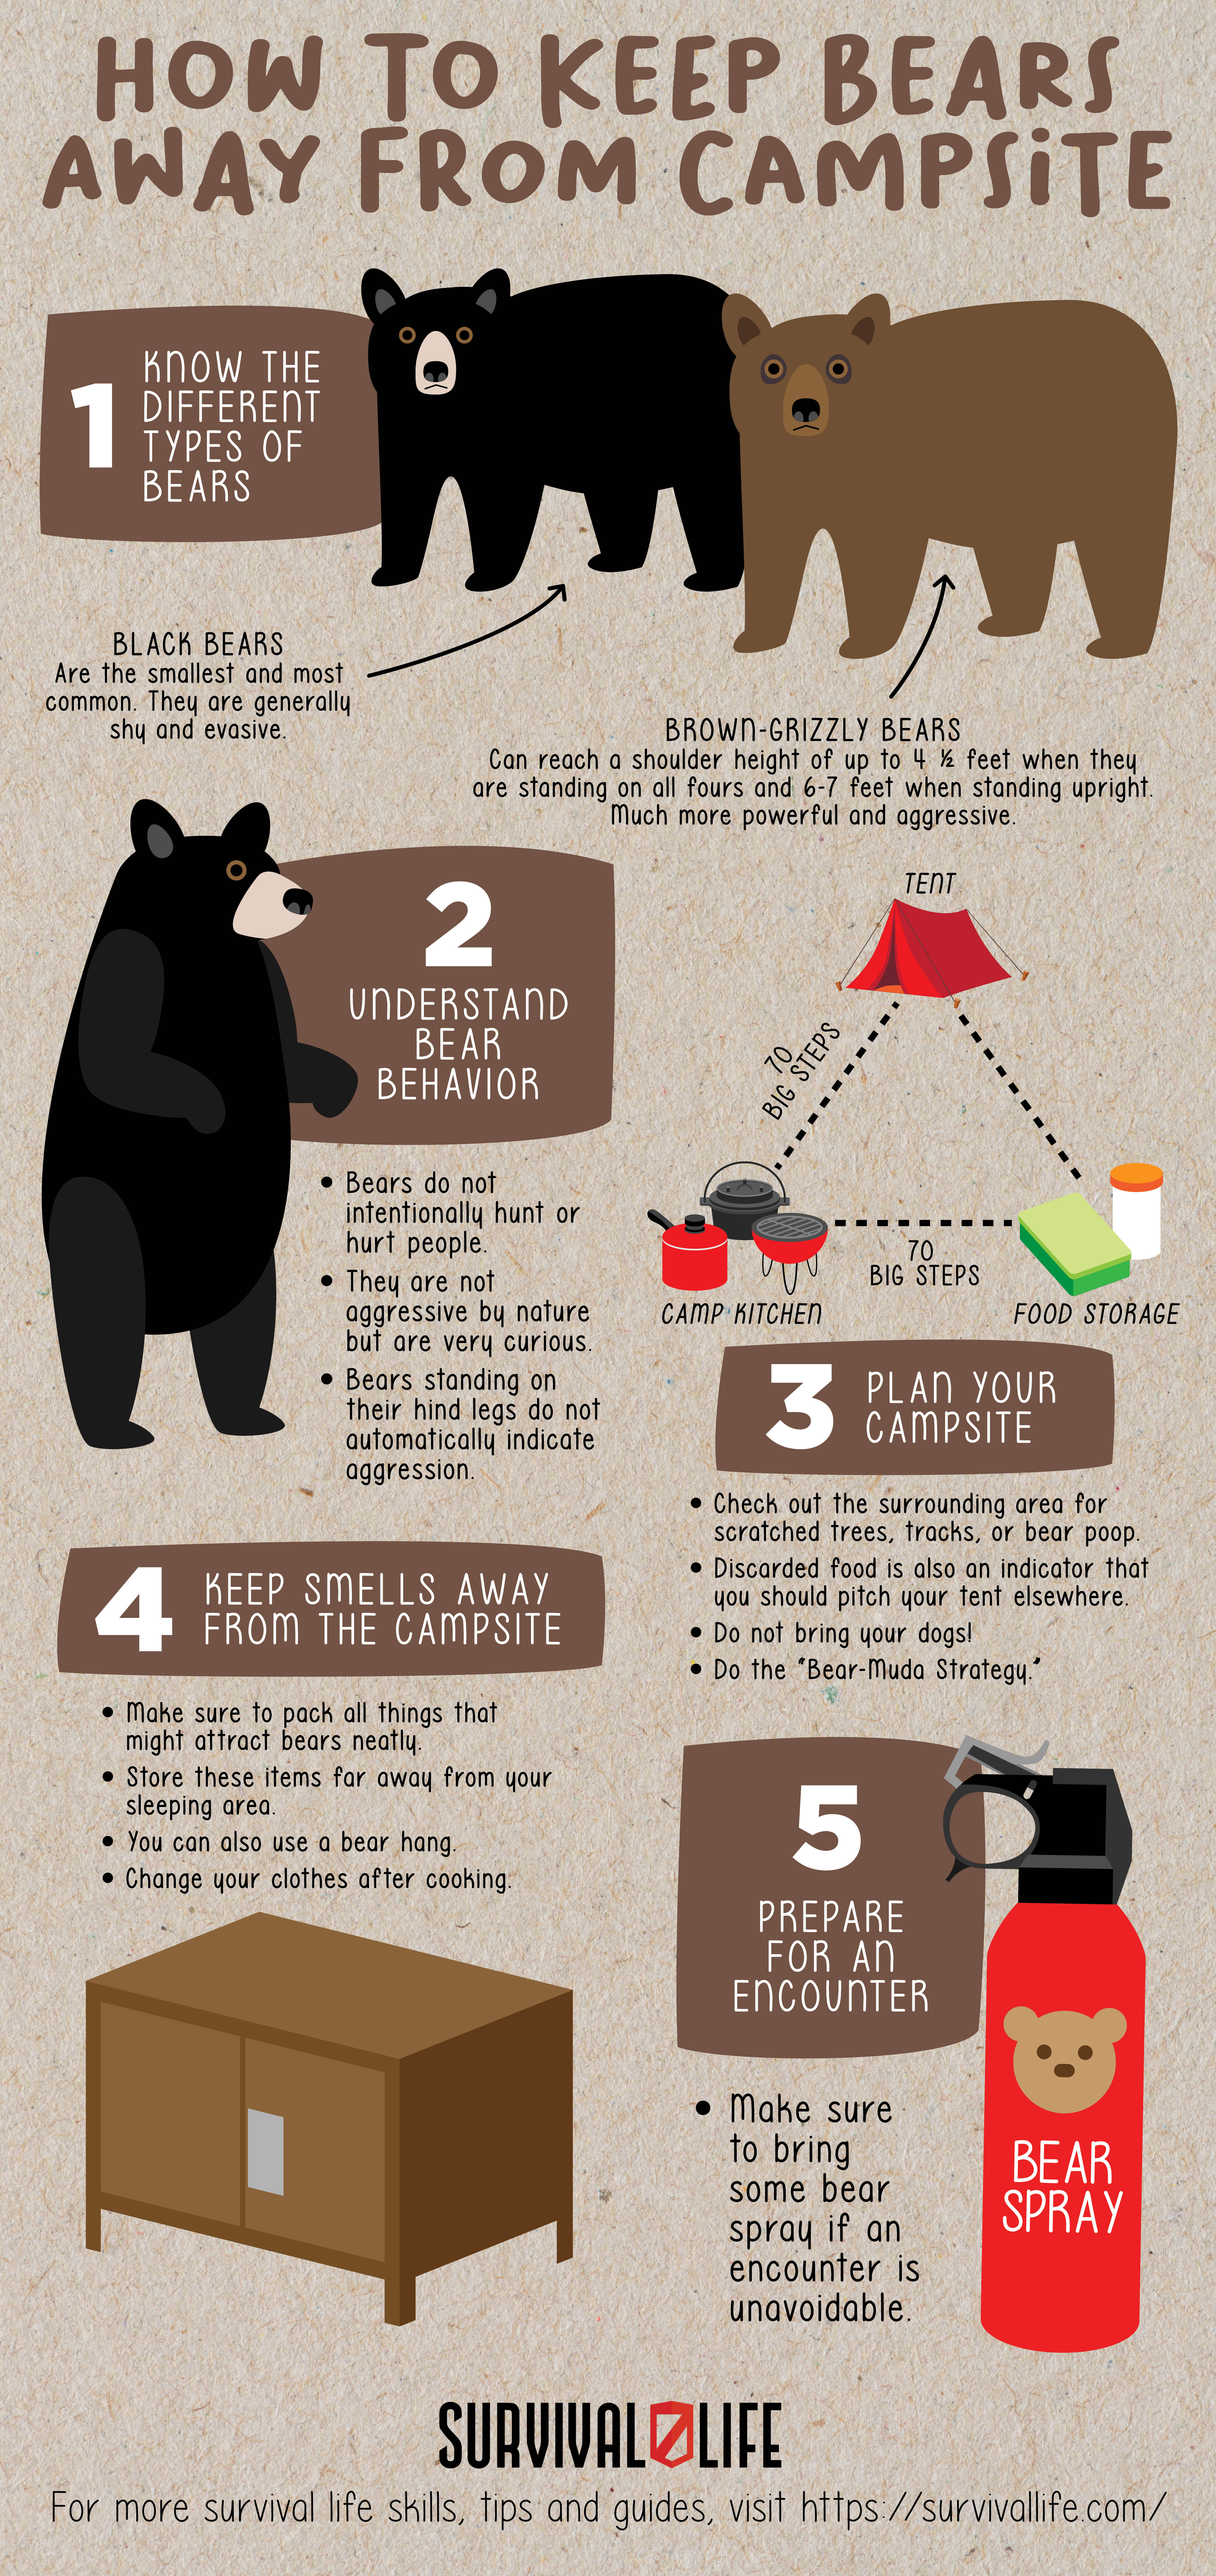 How To Keep Bears Away From Campsite